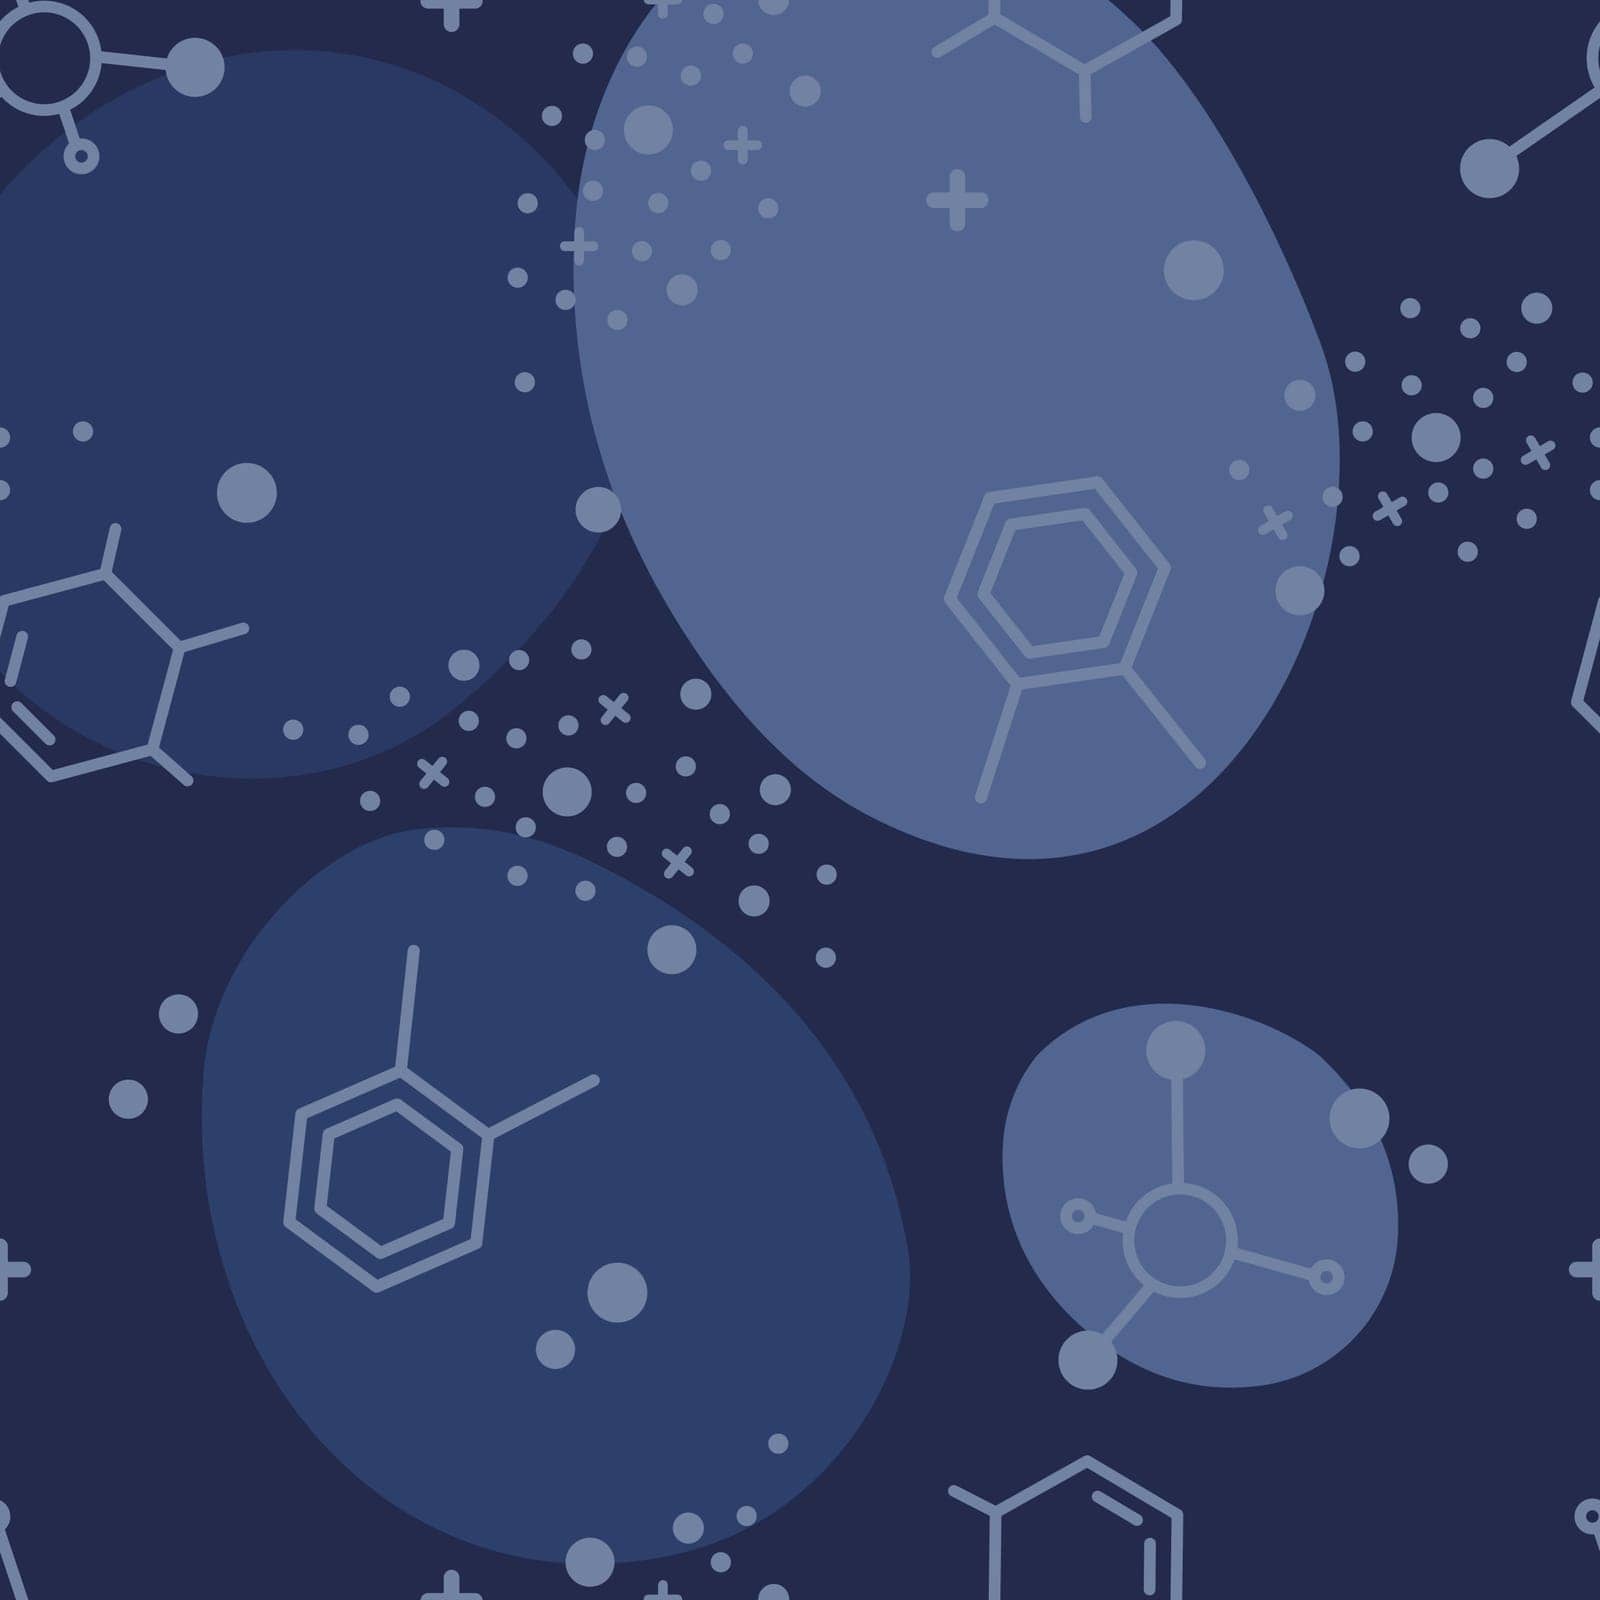 Chemical elements on blue background. Seamless pattern.